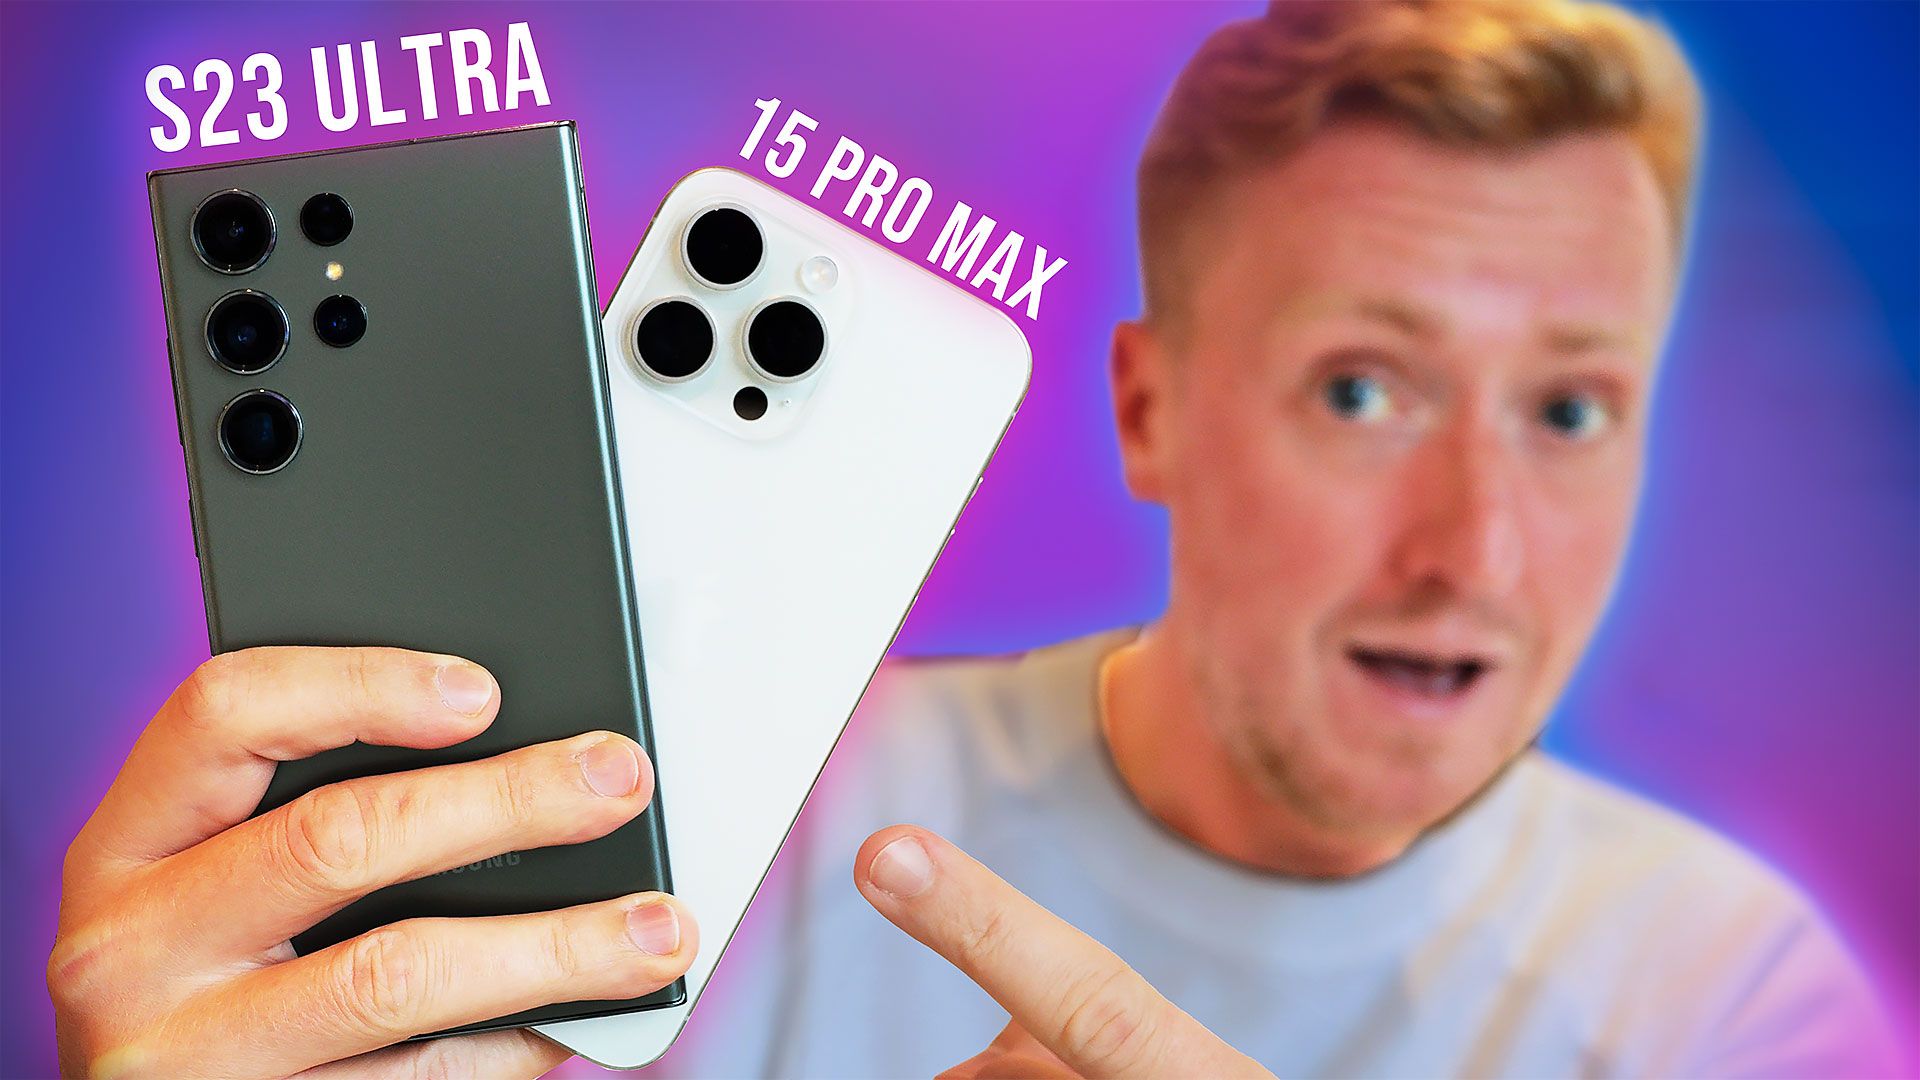 iPhone 11 Pro Max vs Samsung Galaxy Note 10+: Which $1,100 giant